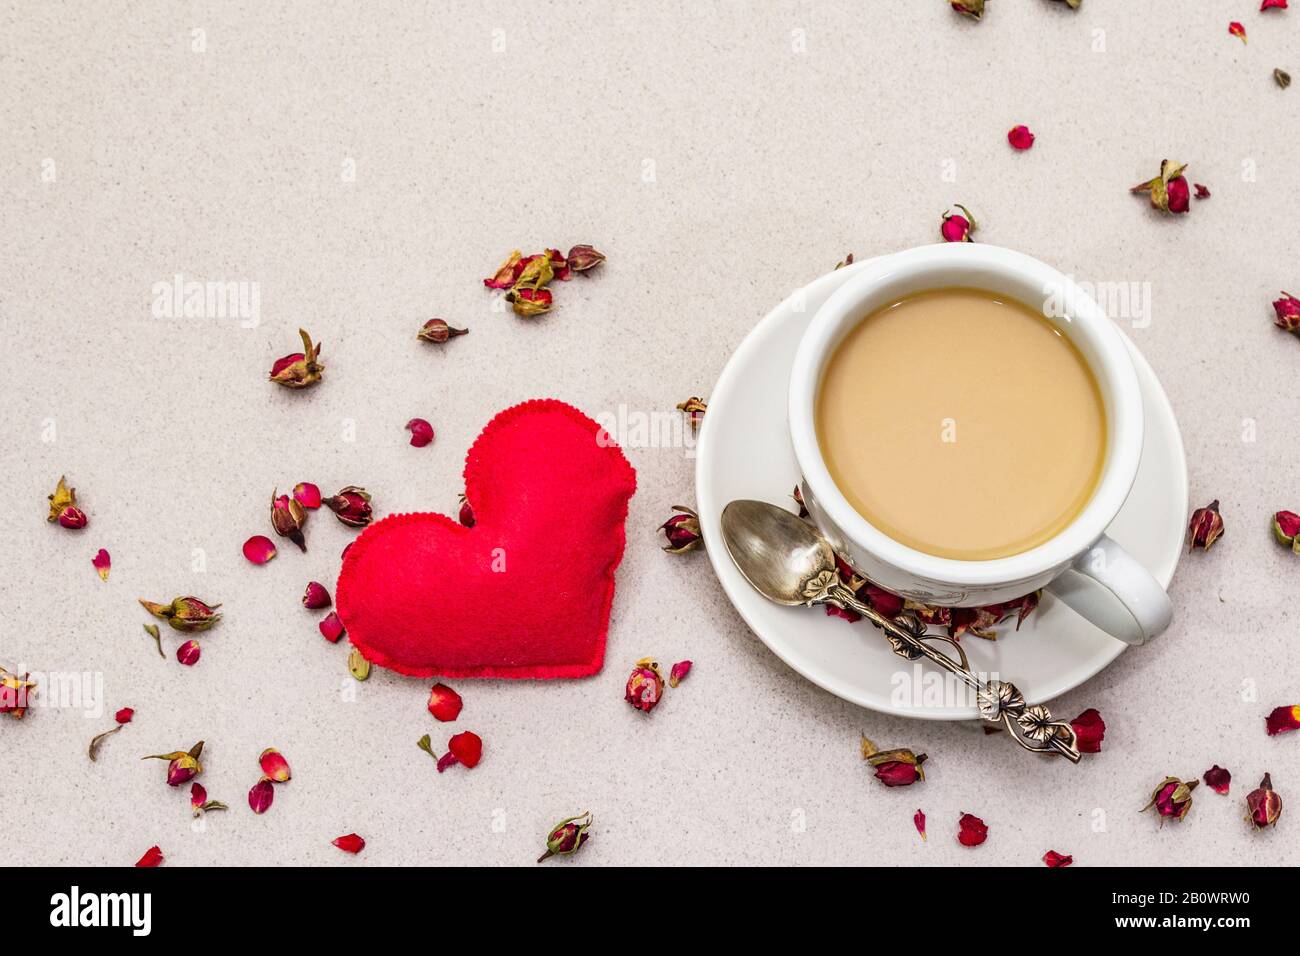 Good morning. Cup of coffee, rose buds and petals, red felt heart ...